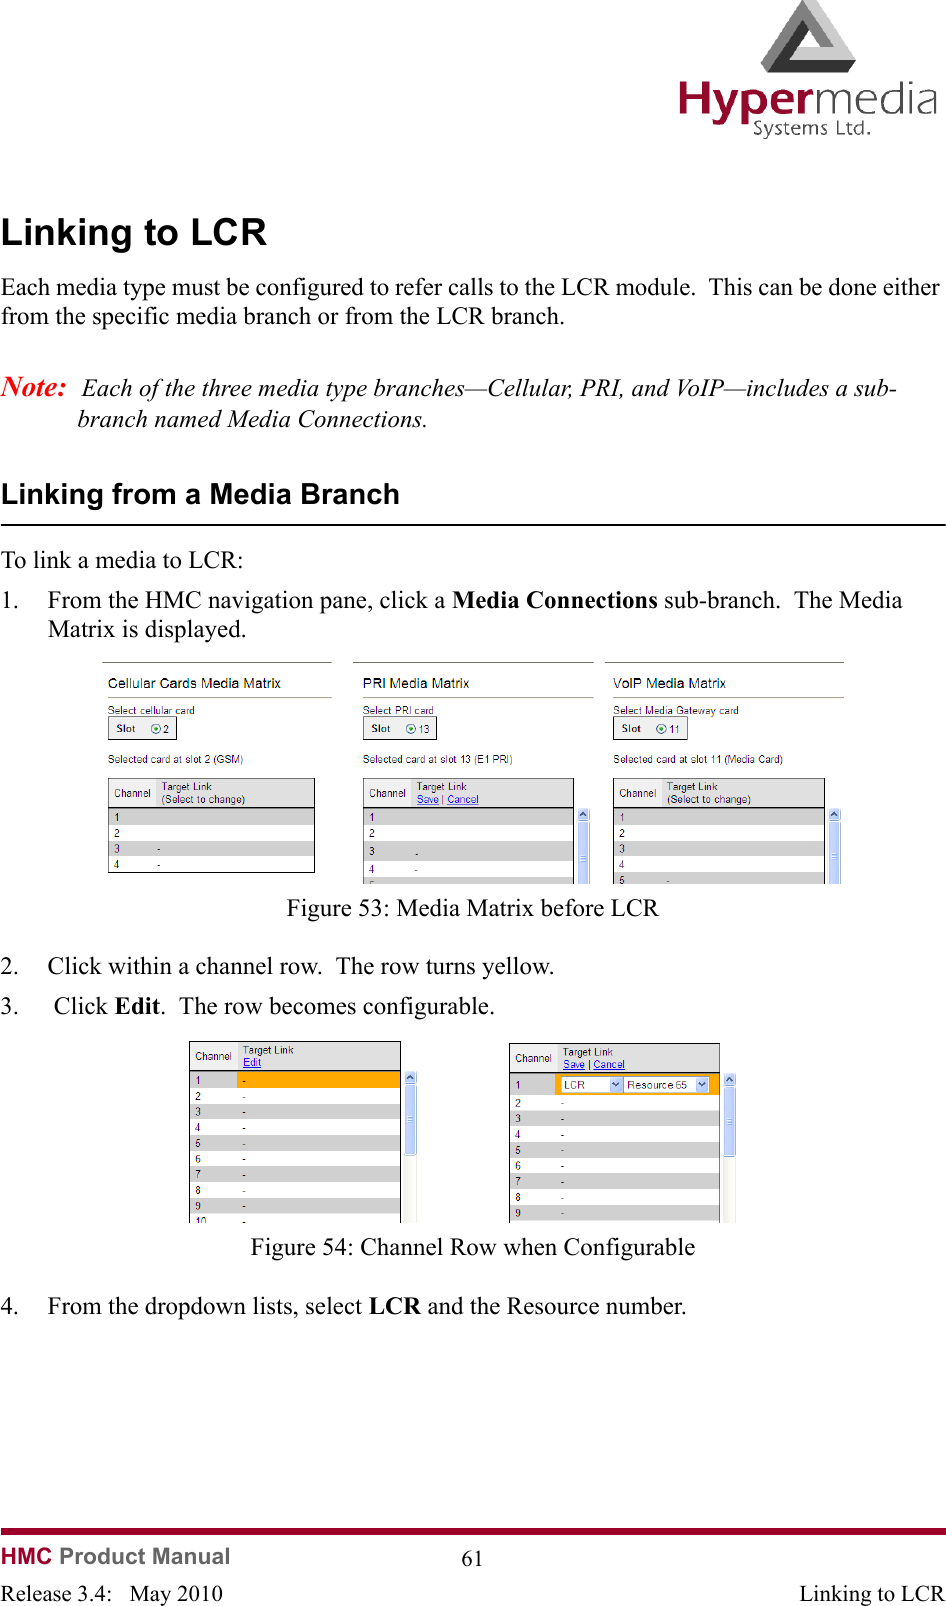 HMC Product Manual  61Release 3.4:   May 2010 Linking to LCRLinking to LCREach media type must be configured to refer calls to the LCR module.  This can be done either from the specific media branch or from the LCR branch.Note:  Each of the three media type branches—Cellular, PRI, and VoIP—includes a sub-branch named Media Connections.Linking from a Media BranchTo link a media to LCR:1. From the HMC navigation pane, click a Media Connections sub-branch.  The Media Matrix is displayed.              Figure 53: Media Matrix before LCR2. Click within a channel row.  The row turns yellow.3.  Click Edit.  The row becomes configurable.              Figure 54: Channel Row when Configurable4. From the dropdown lists, select LCR and the Resource number.